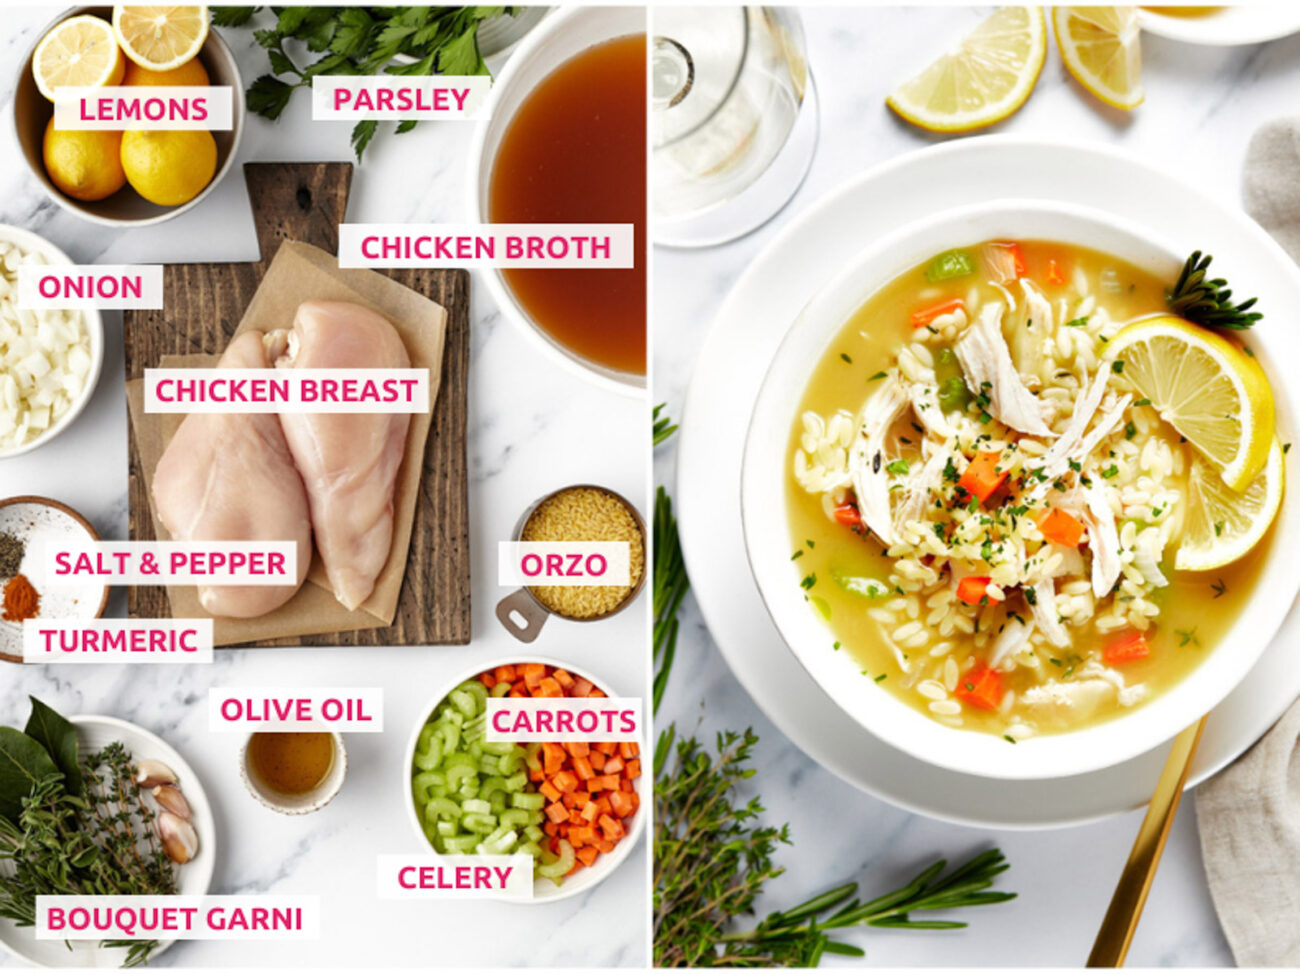 Ingredients for lemon chicken orzo soup: chicken breasts, chicken broth, parsley, lemon, onion, orzo, salt, pepper, turmeric, bouquet garni, olive oil, celery and carrots.